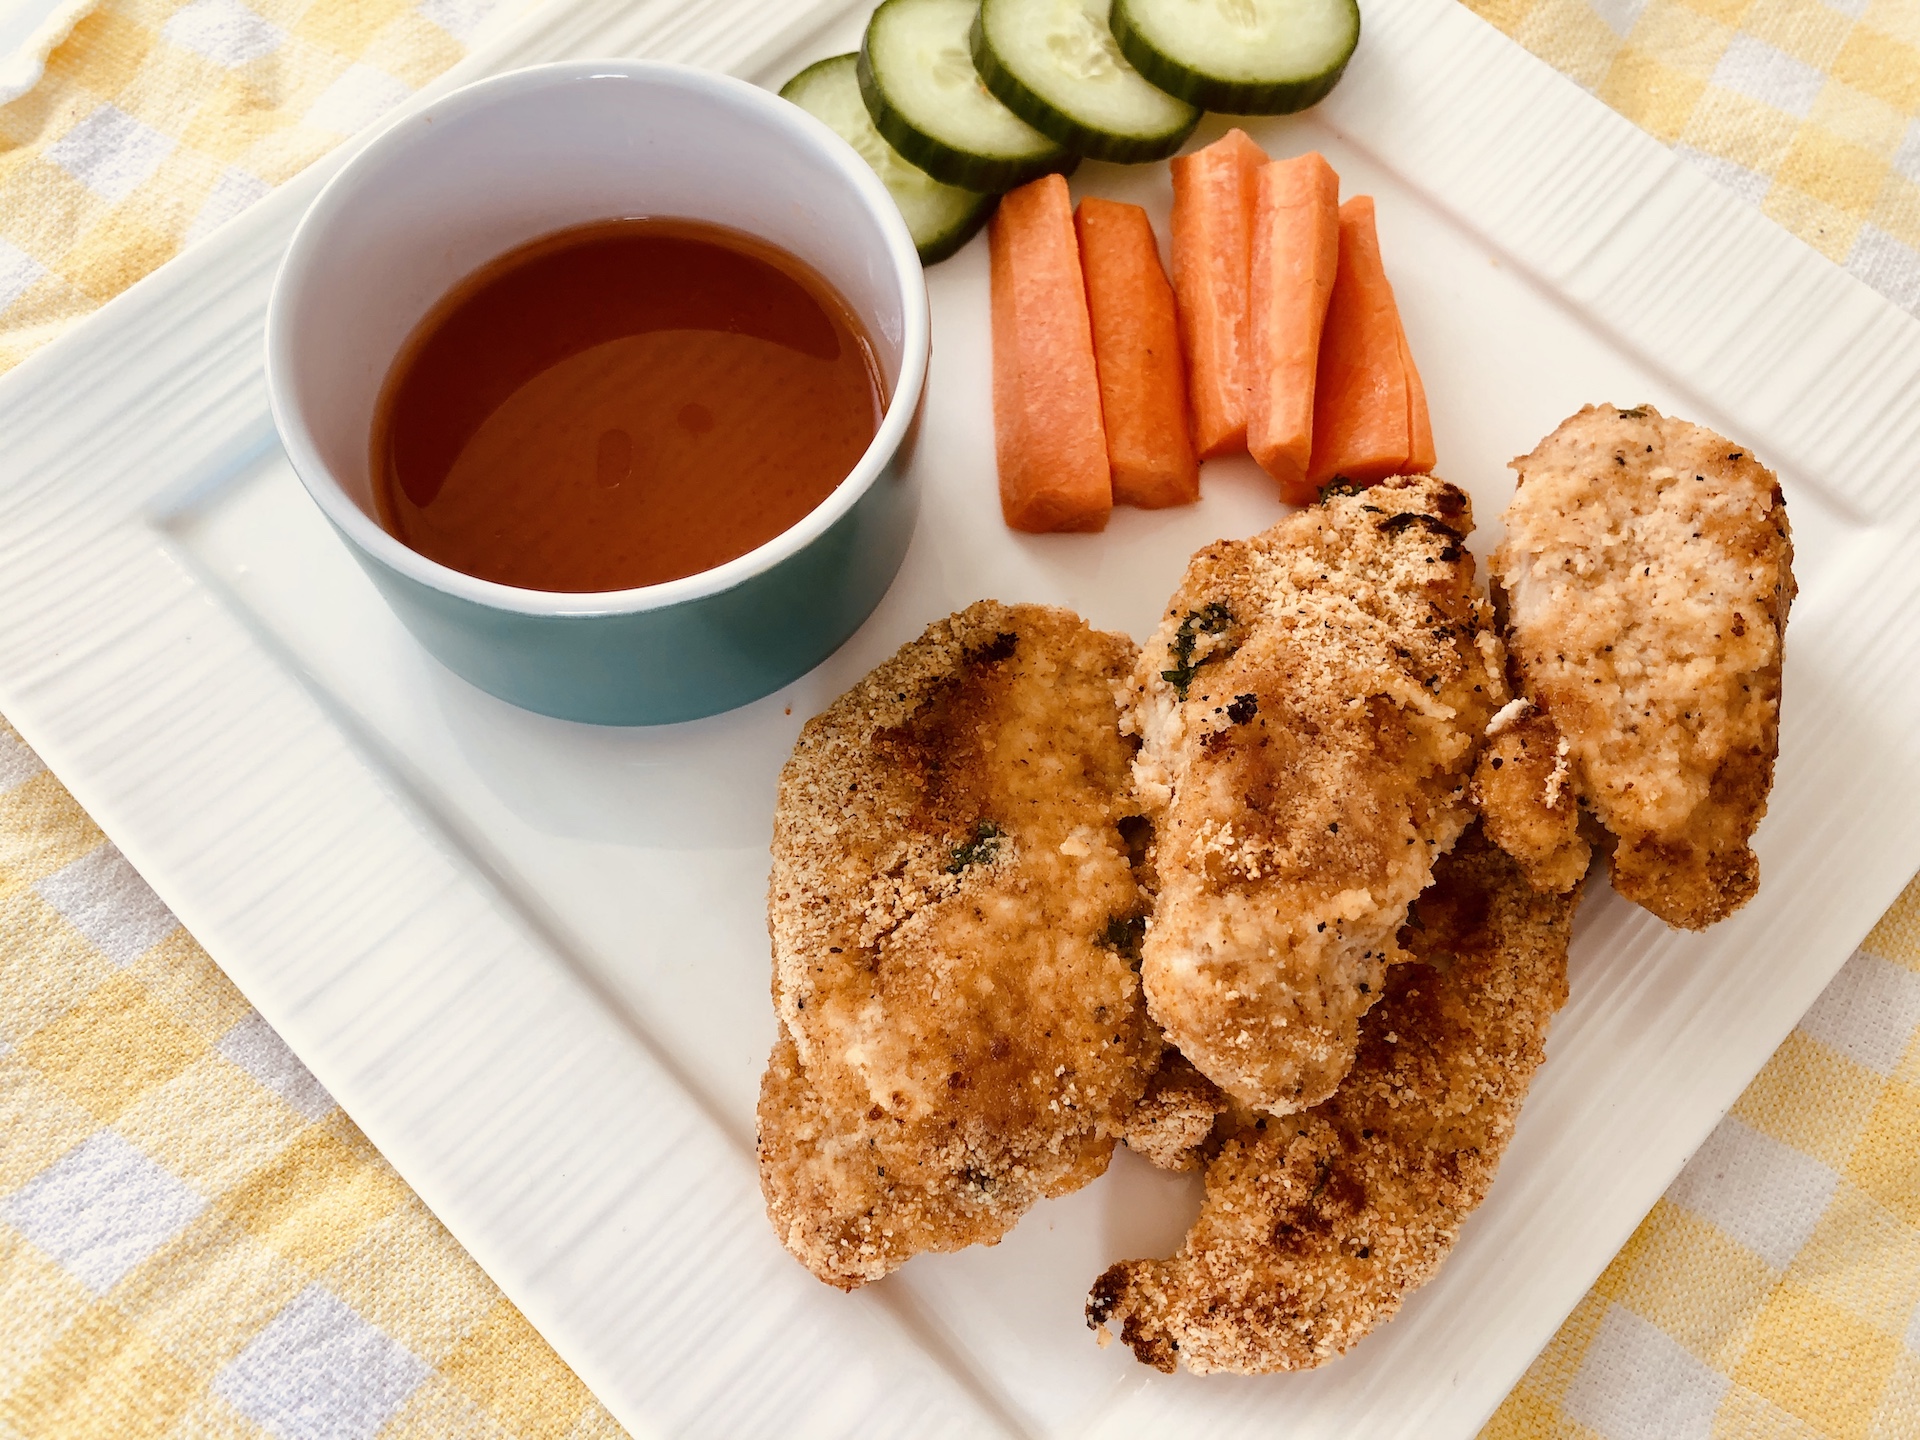 Buffalo Chicken Tenders - GLW; Click to read this buffalo chicken tenders recipe on GLW! My goal is to have a healthy kitchen. As I finish one not so good ingredient I replace it with a healthier option. I finished all my white flour and replaced it with almond flour. This has been great for baking although I had to learn that it’s not a 1 to 1 conversion. Chicken breast recipes easy quick simple. Chicken tender recipes baked ovens. Dinner recipes for family main dishes picky eaters for kids.